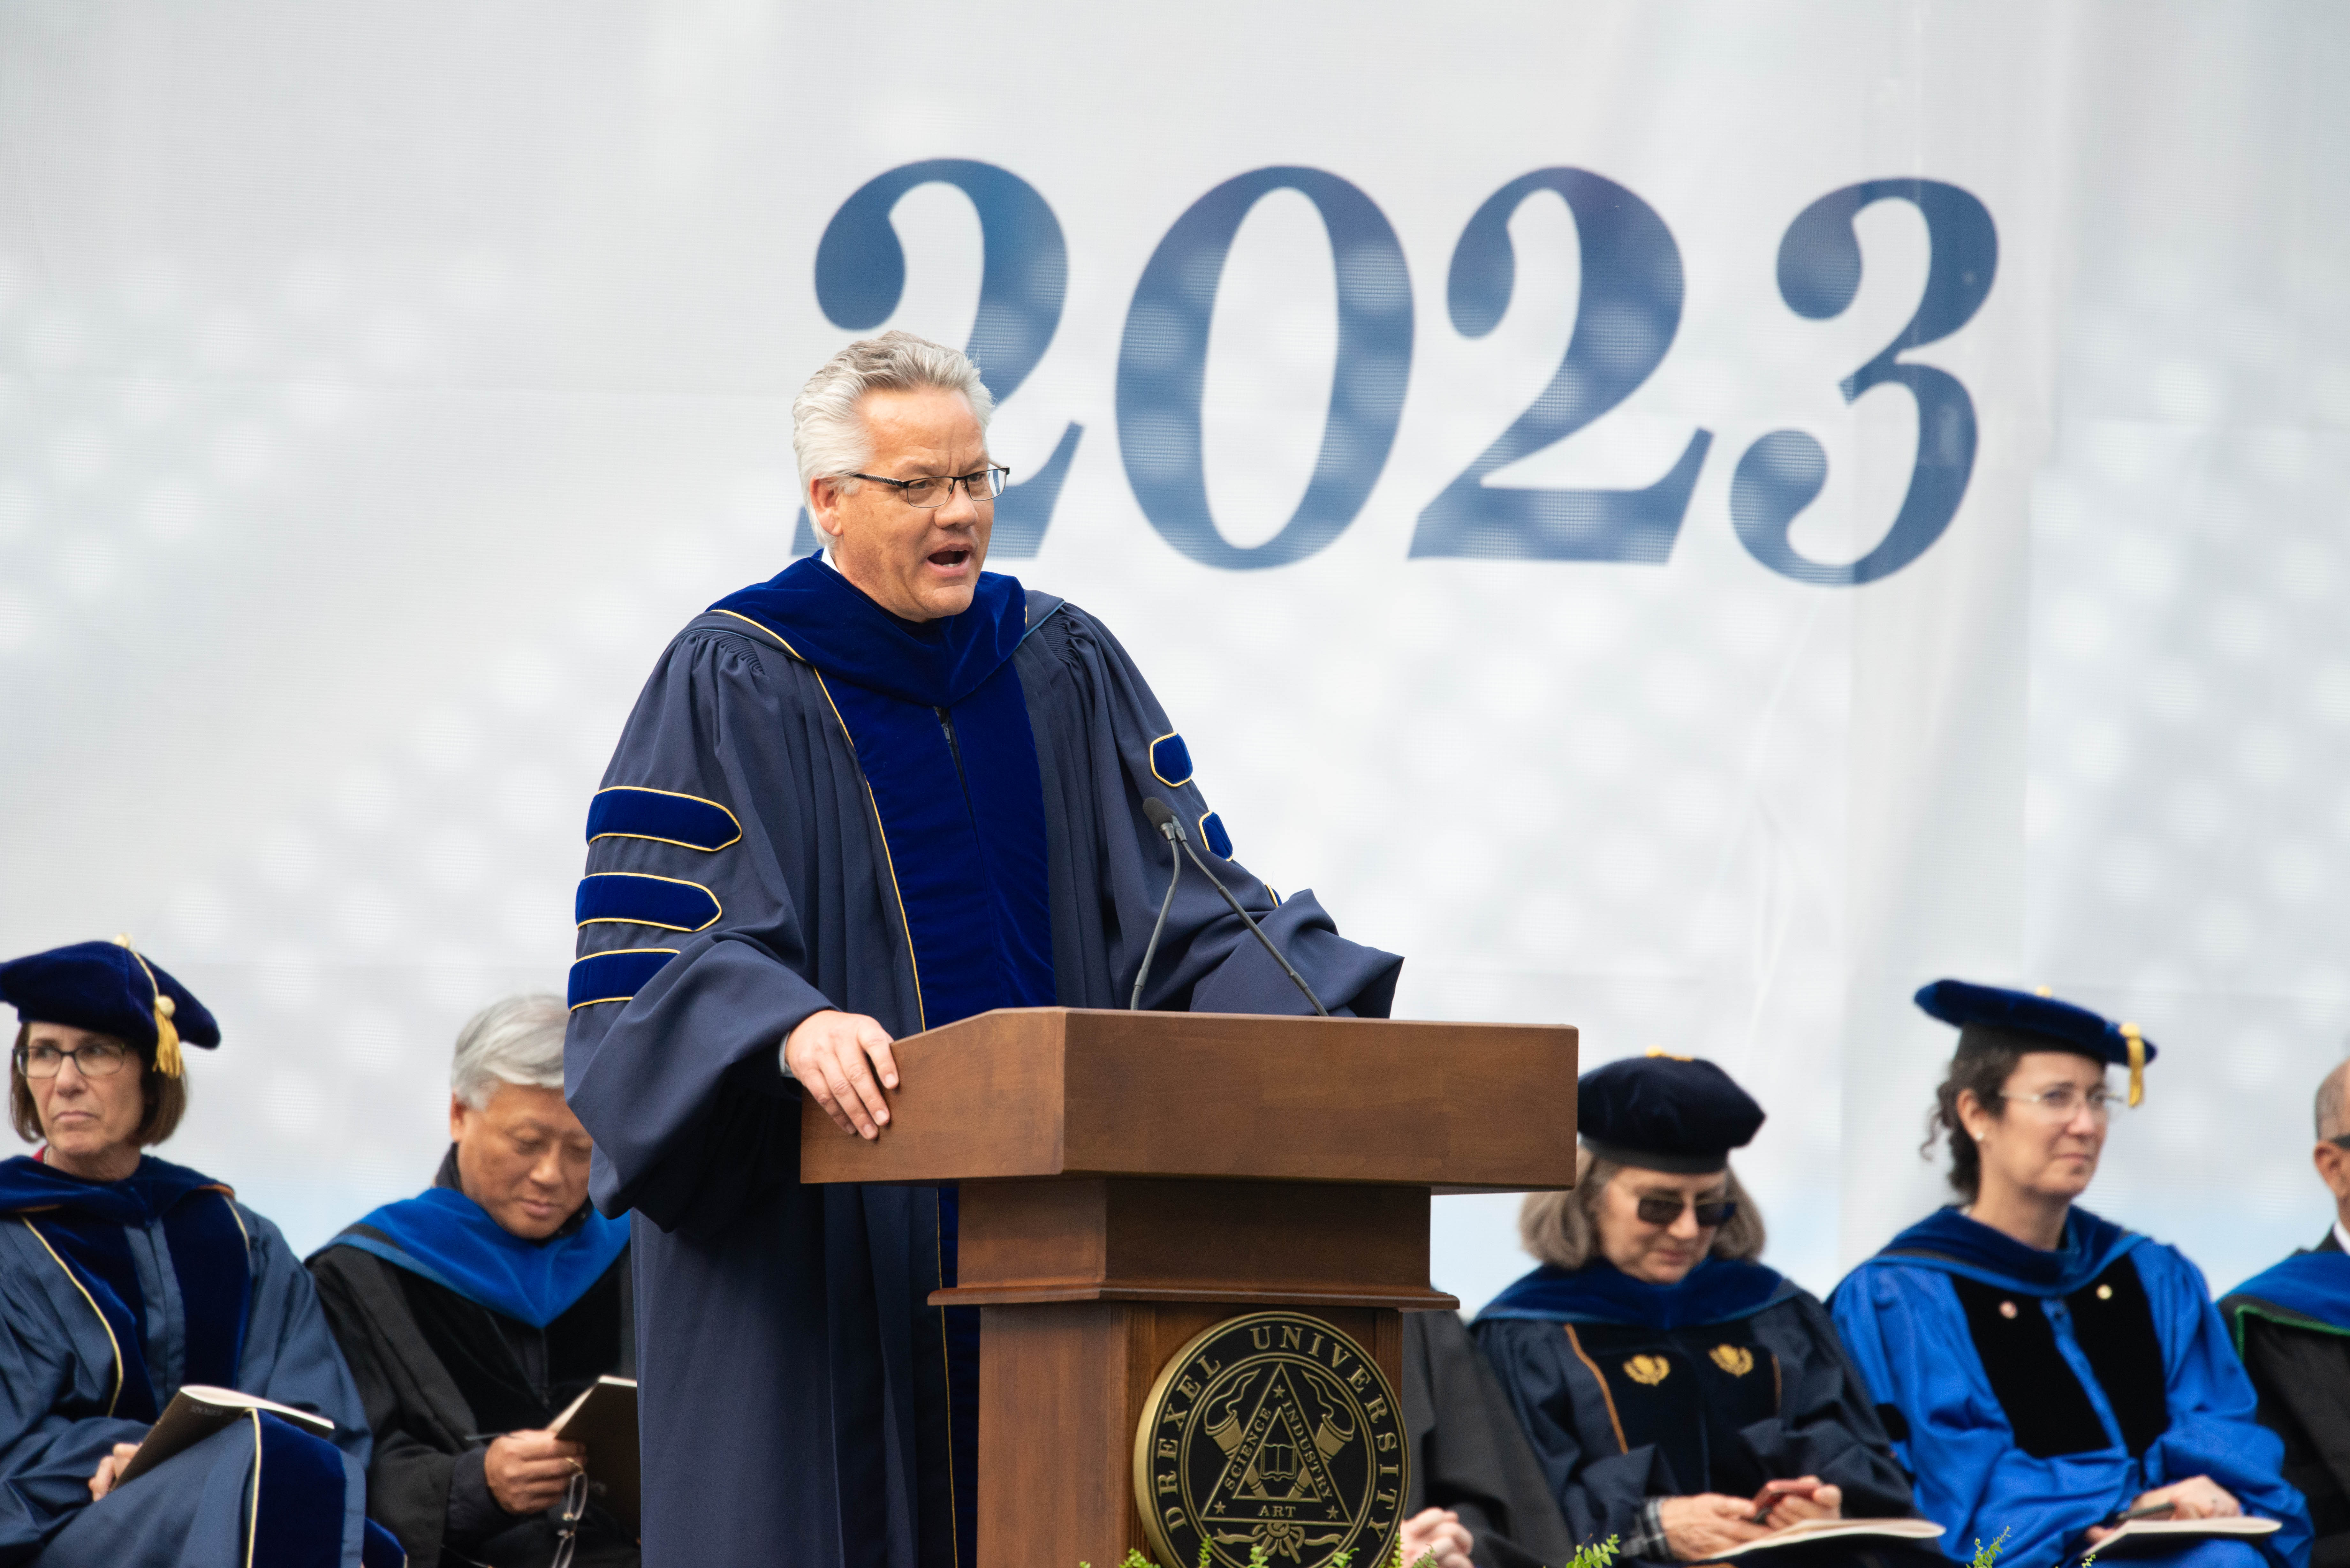 Provost Paul Jensen addresses graduates in front of people with caps and gowns and 2023 on the white background.